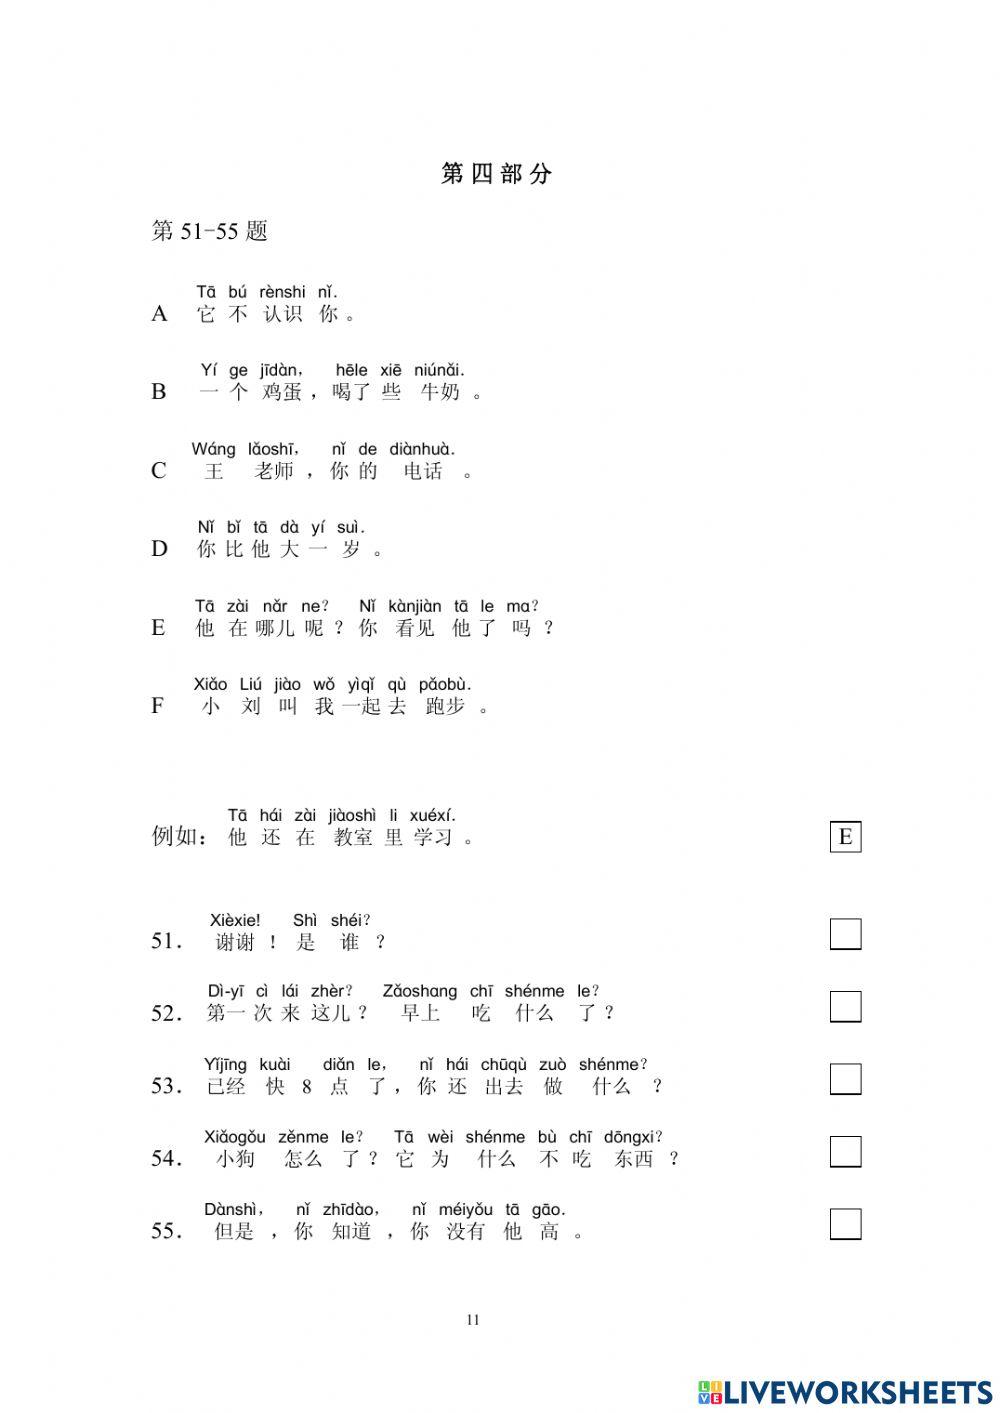 2101 - Test - Chinese (HSK) 2-2